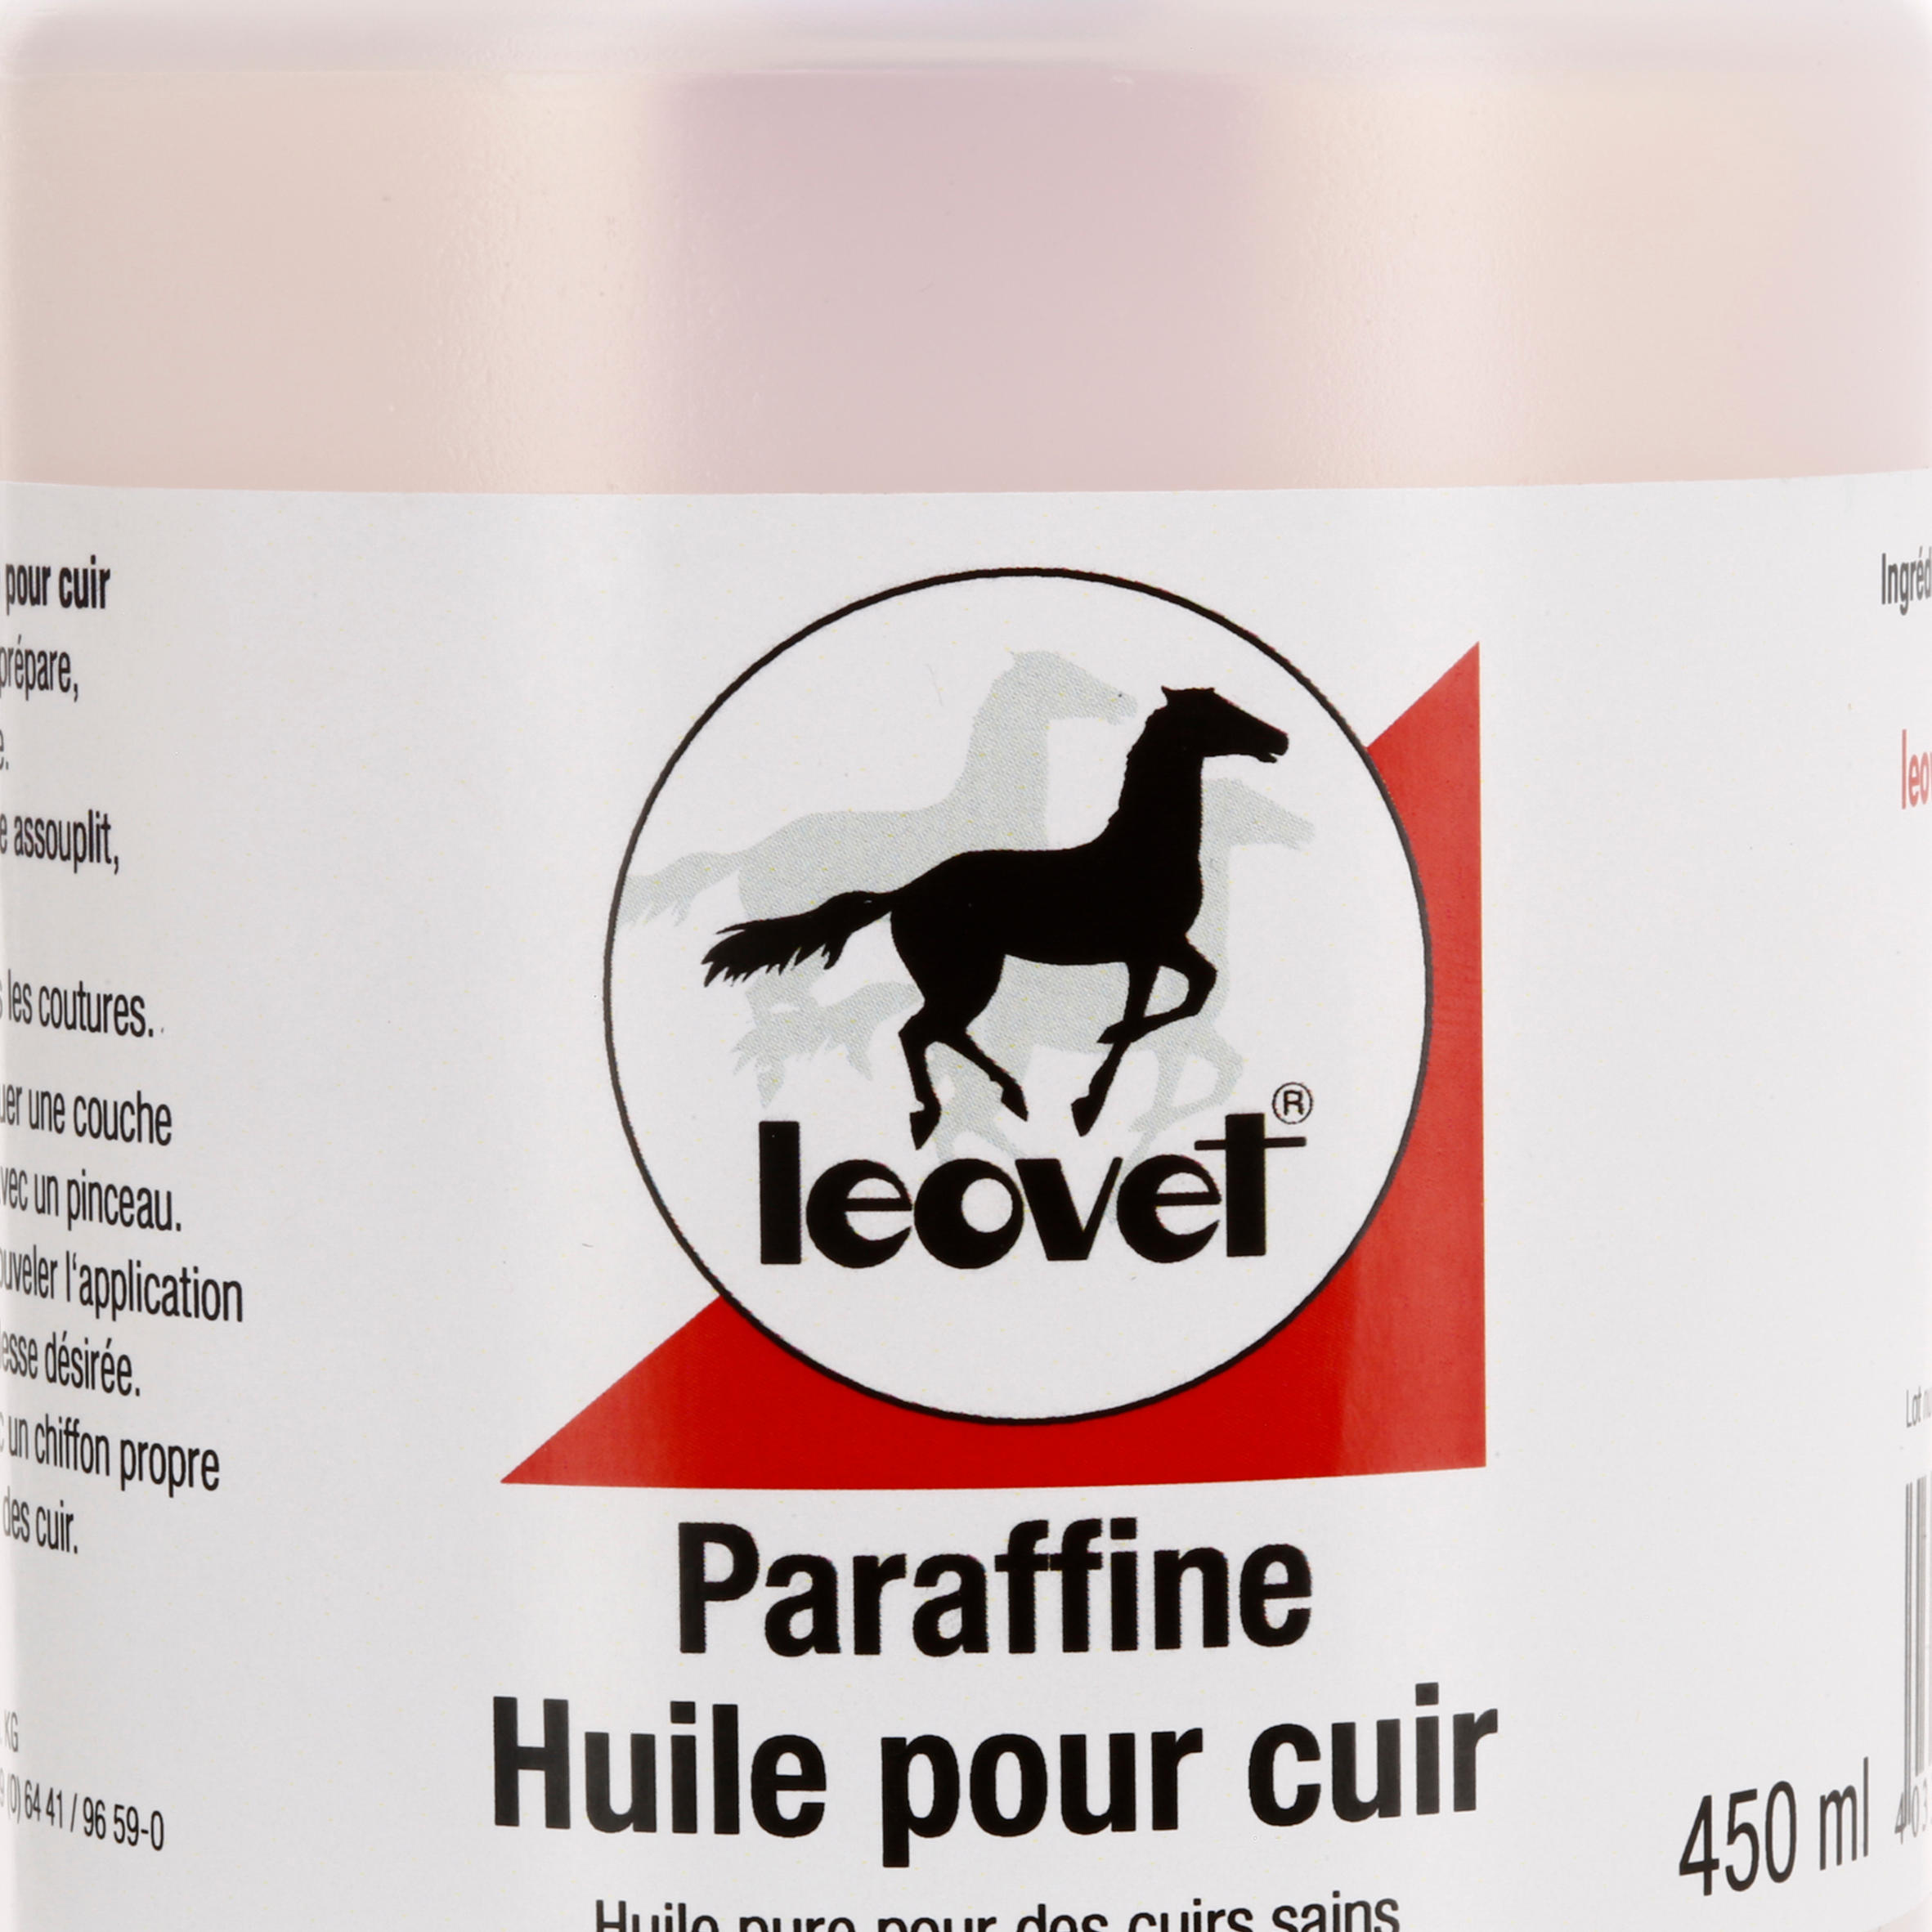 Horse Riding Paraffin Oil for Leather + Brush for Horse & Pony - 450 ml 5/6